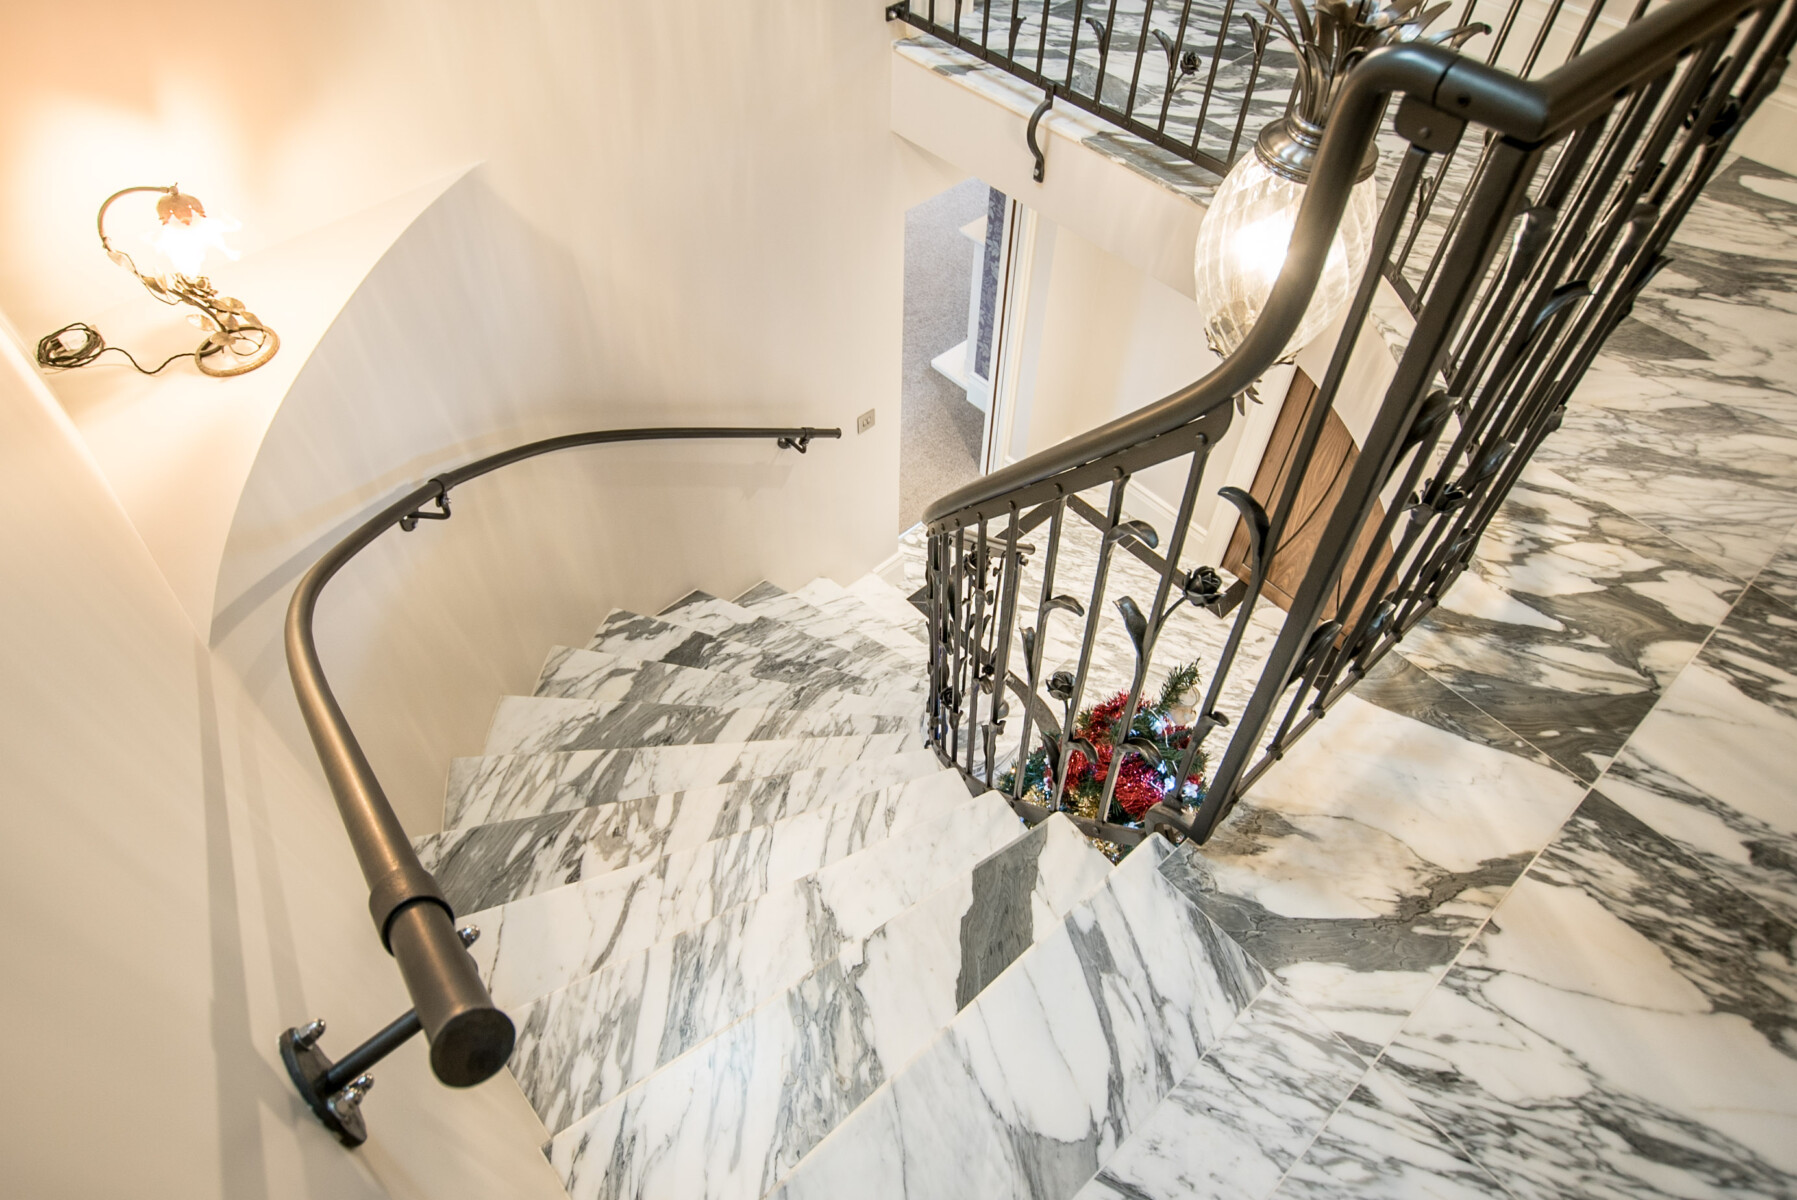 Landford Stone arabescato corchia marble stone flooring on stairs example